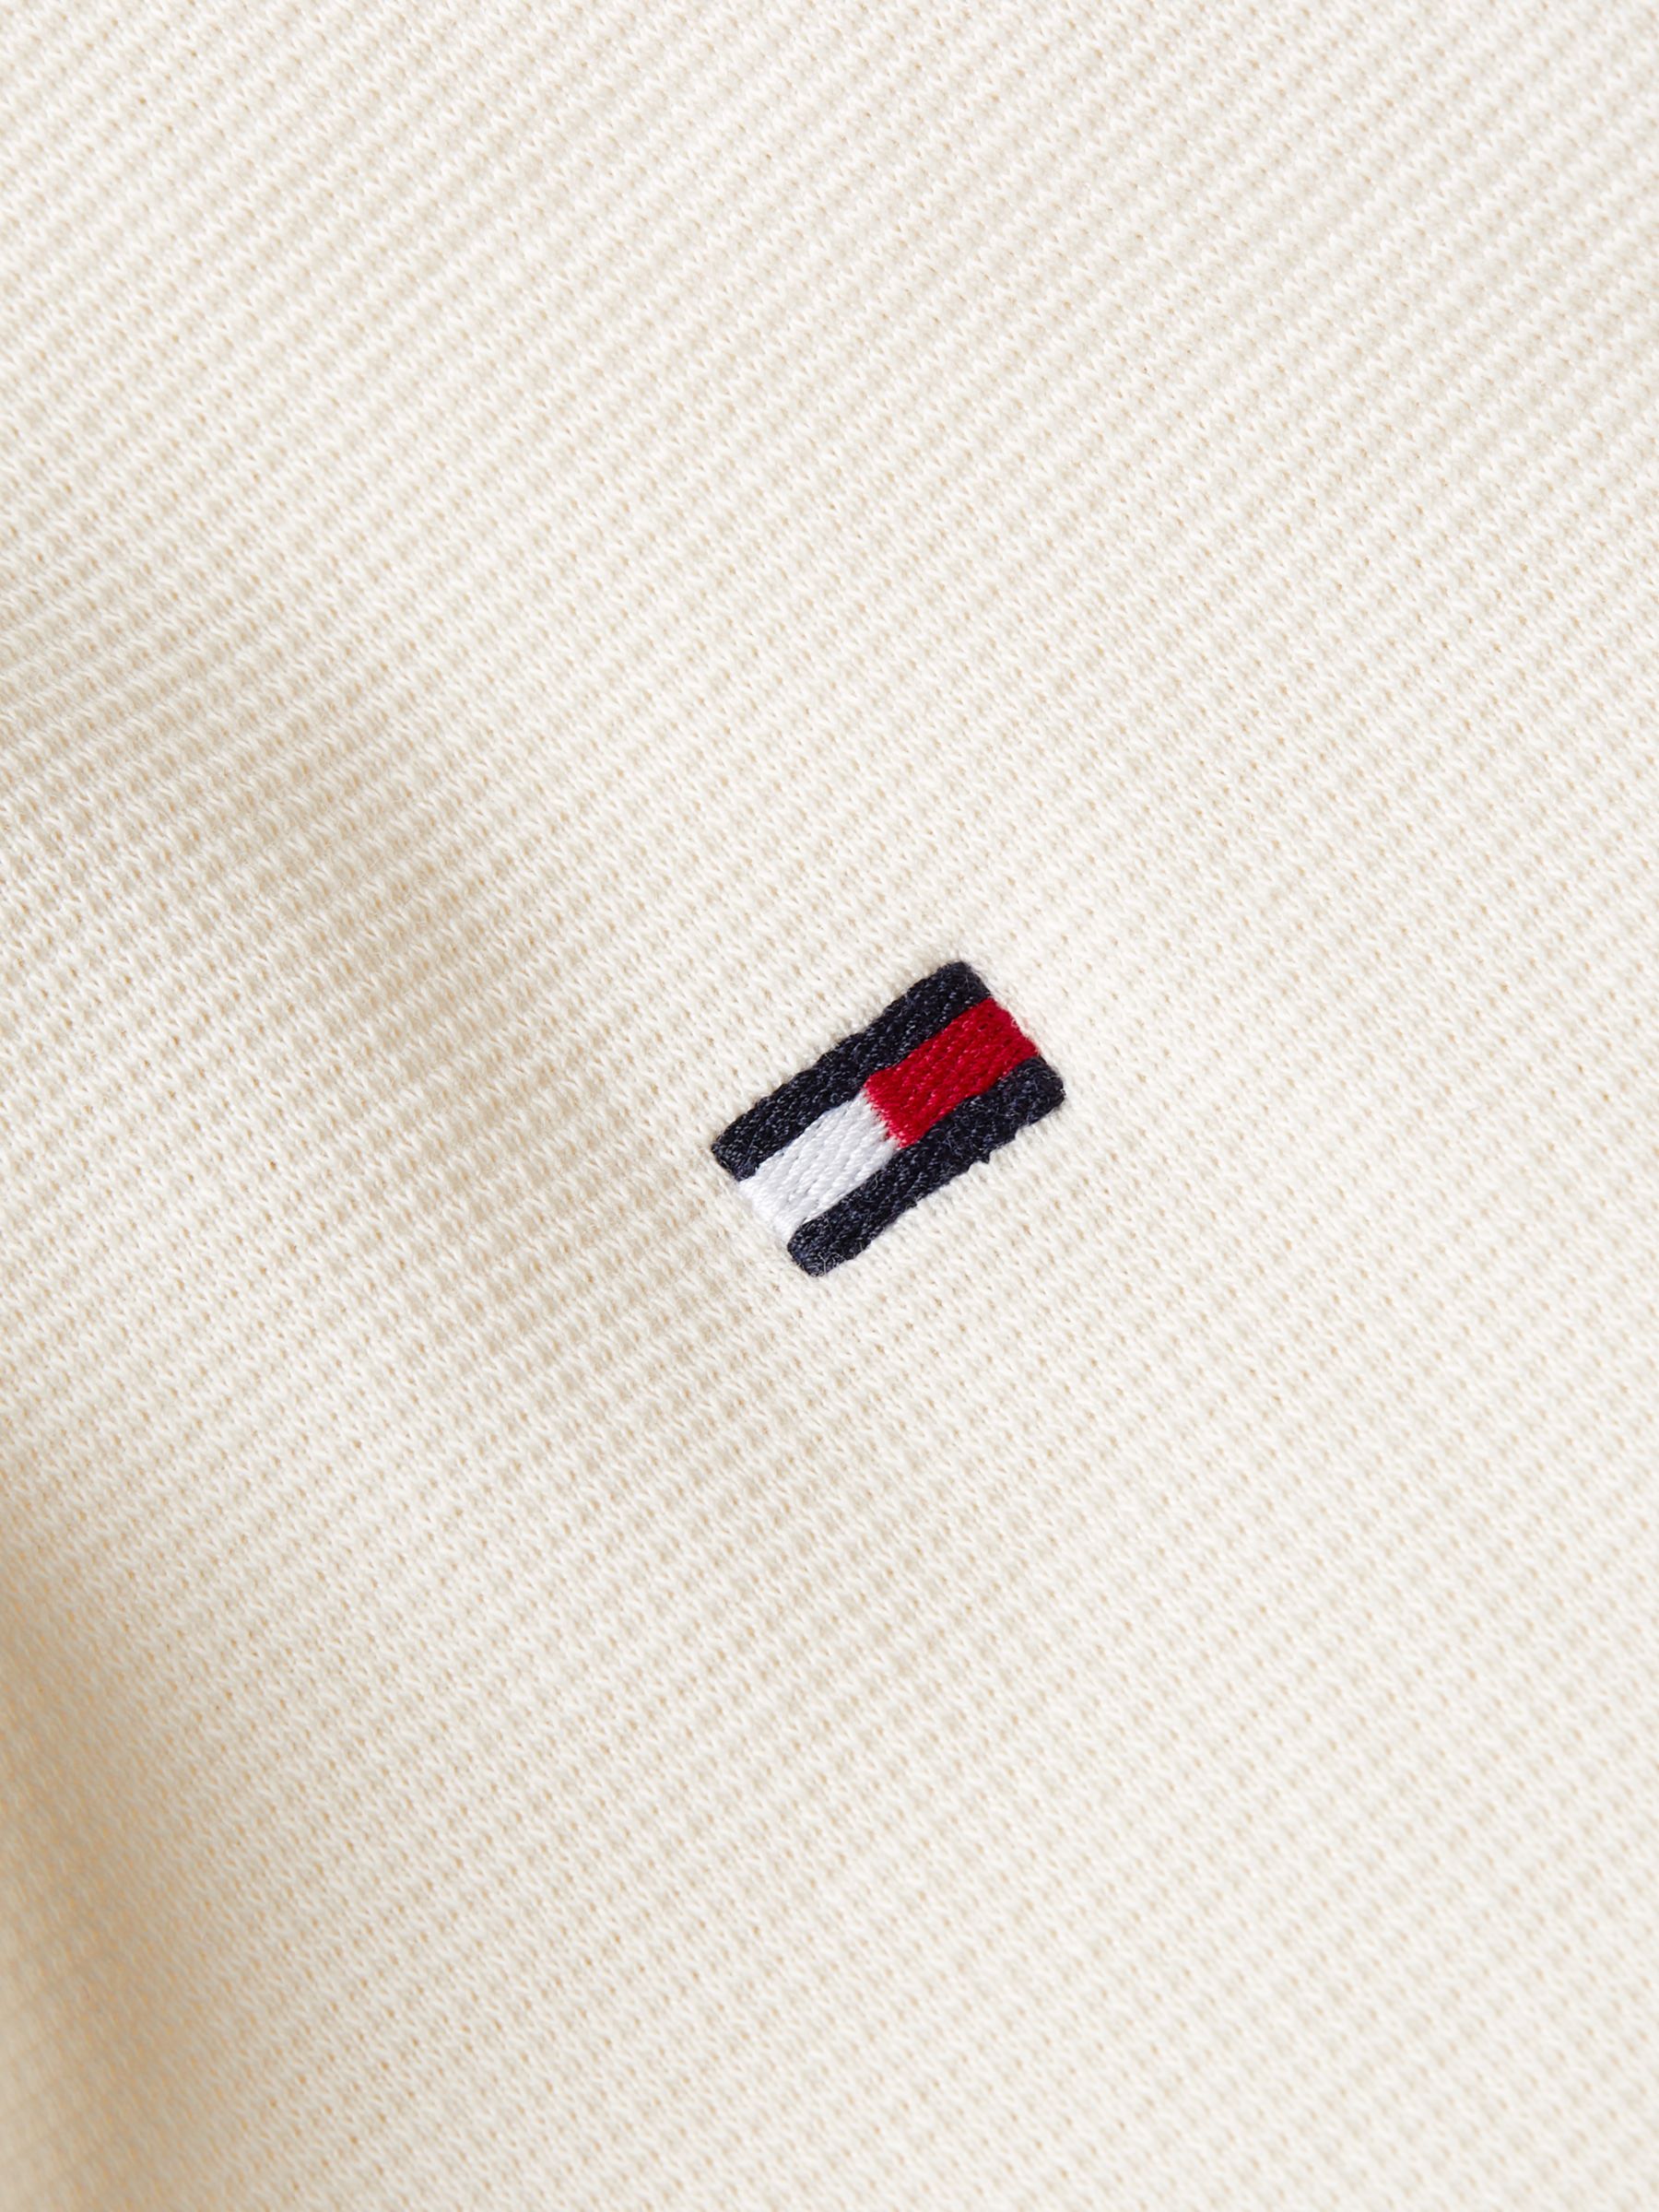 Tommy Hilfiger Global Stripe Short Sleeve Monotype Polo Shirt, Calico, L